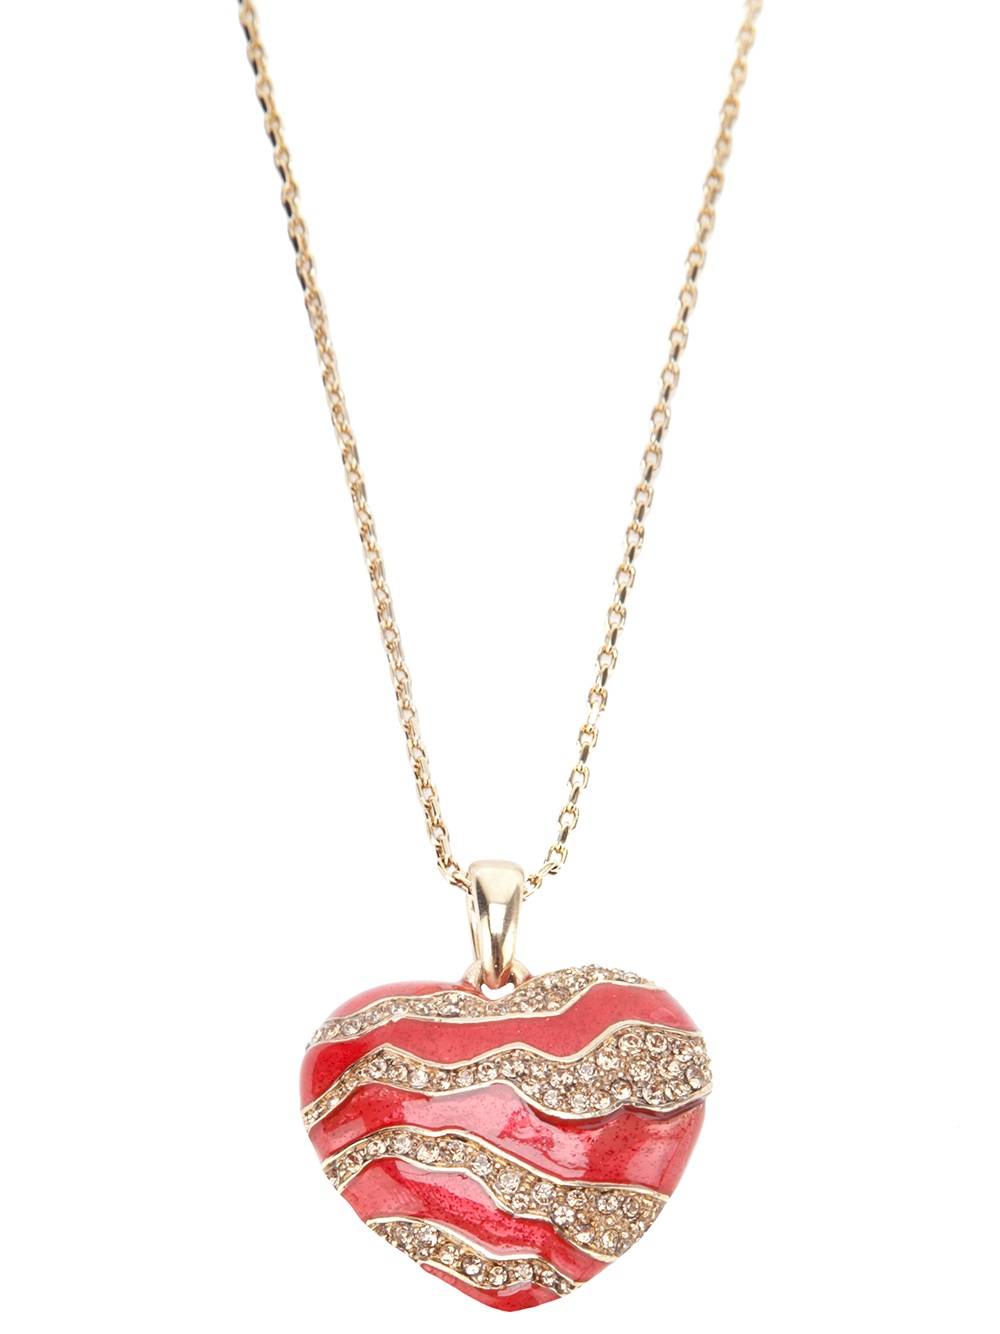 Lyst - Roberto Cavalli Heart Necklace in Red